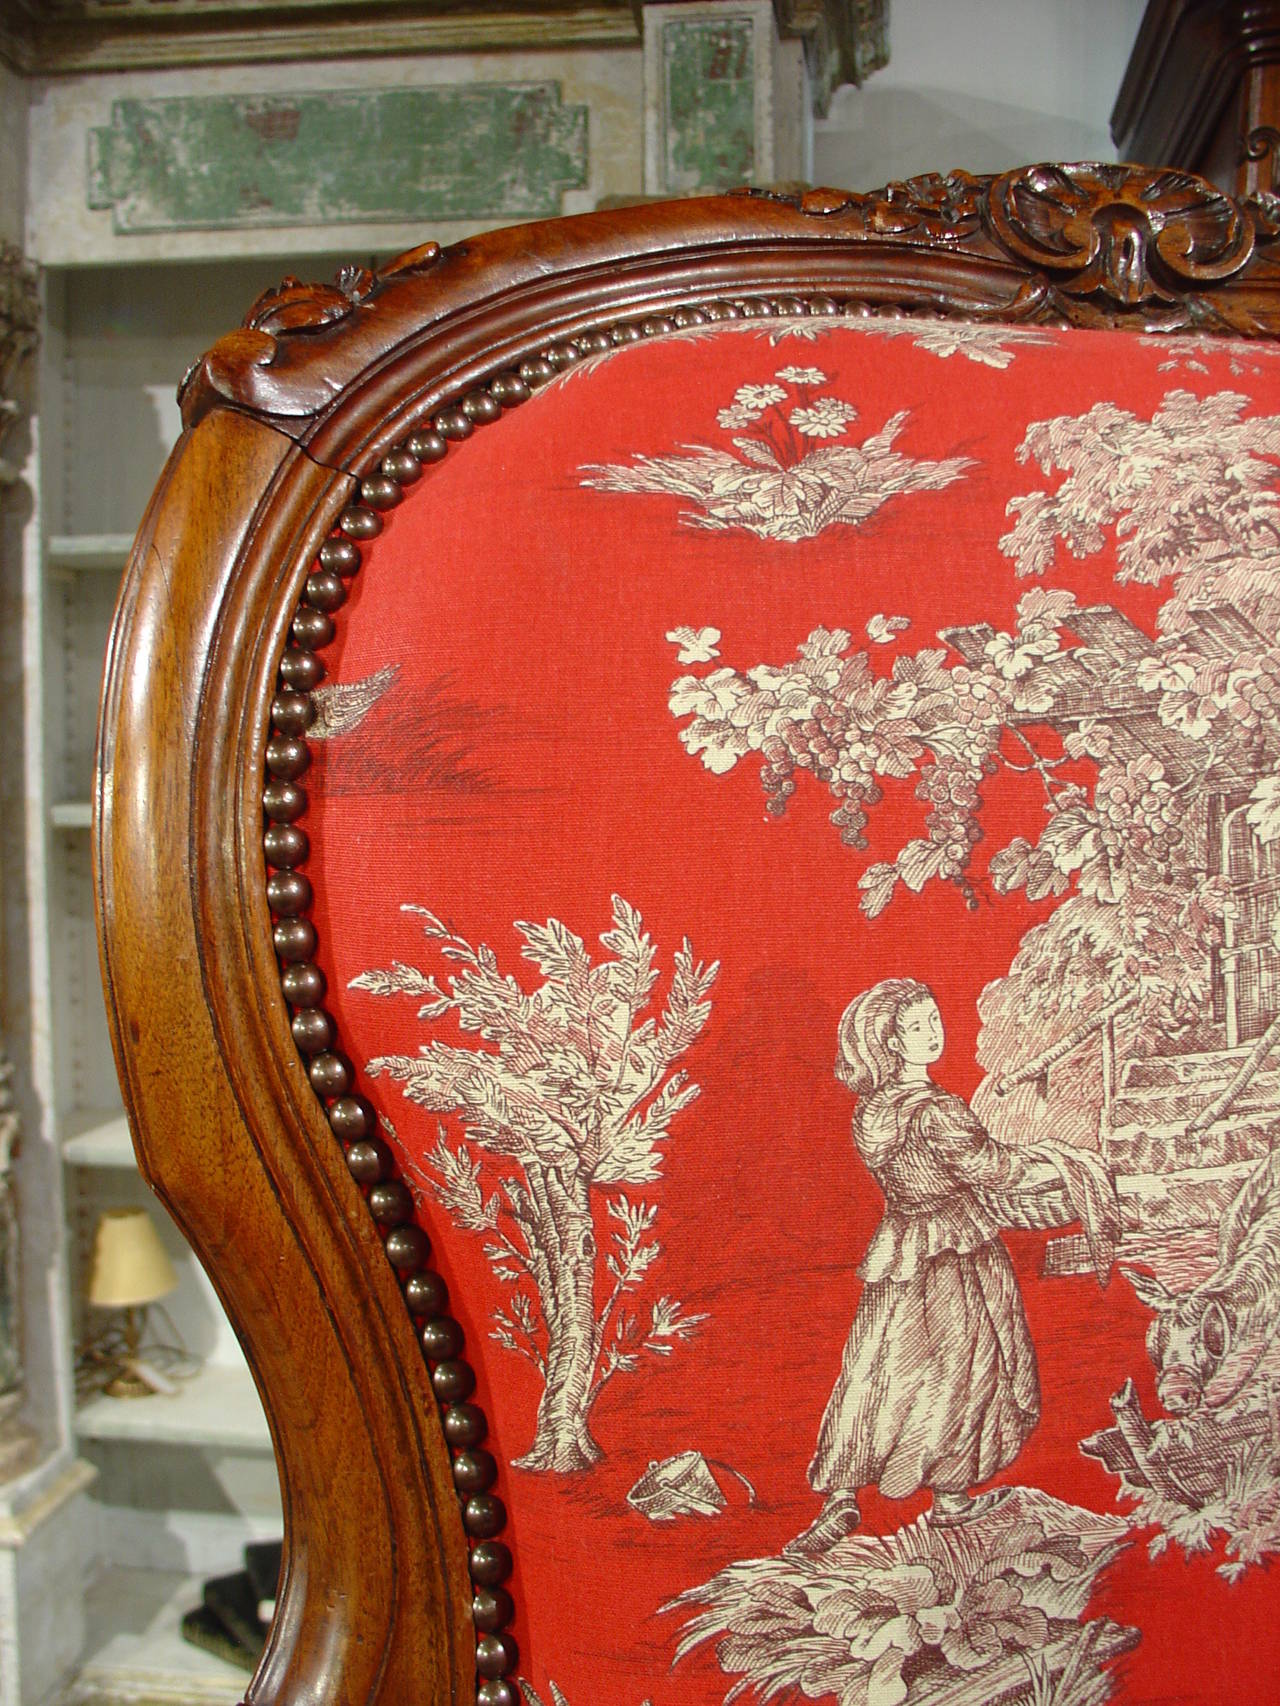 19th Century Pair of Louis XV Style Walnut Fauteuils with Toile de Jouy Upholstery